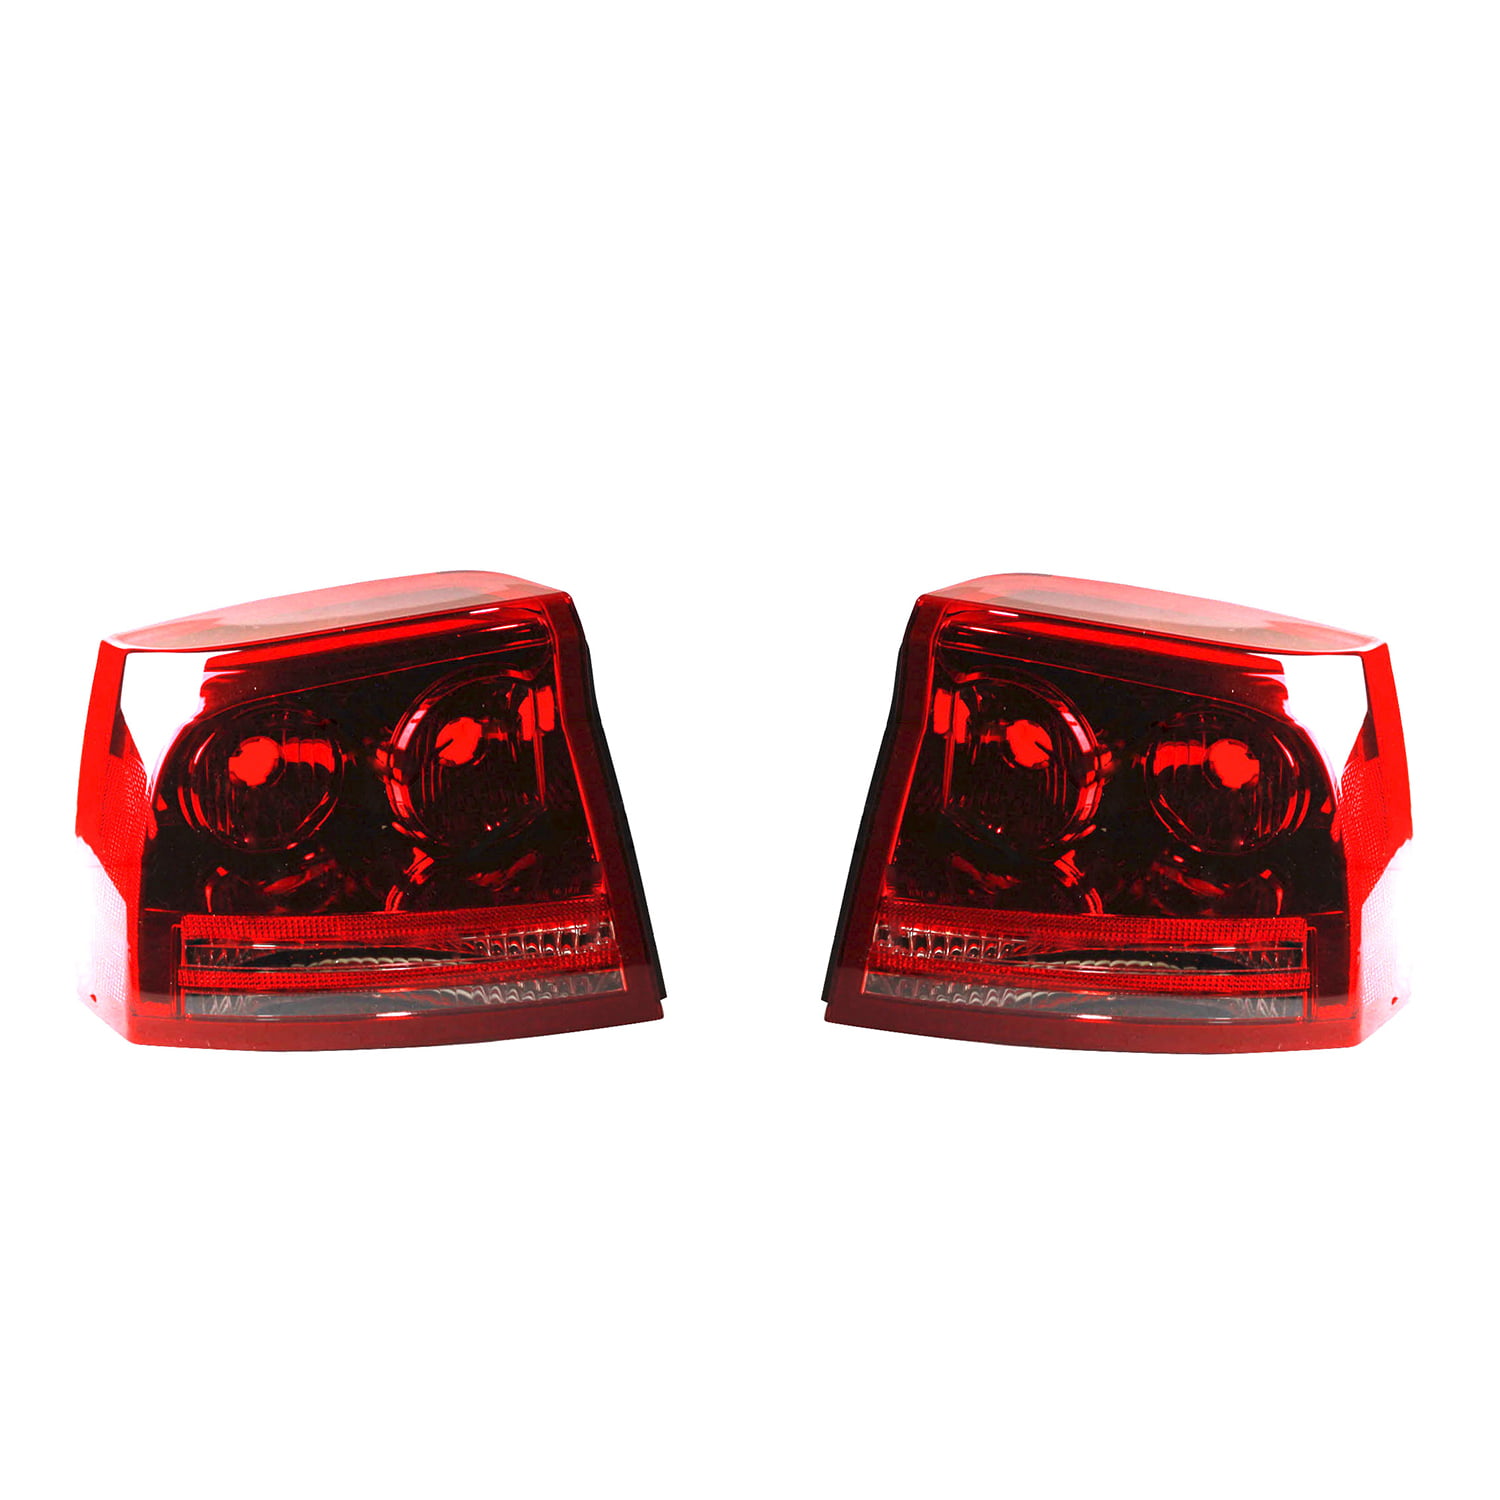 NEW PAIR OF TAIL LIGHTS FITS DODGE CHARGER 2006 2007 2008 CH2819105 CH2818105 5174407AA 5174406AA 